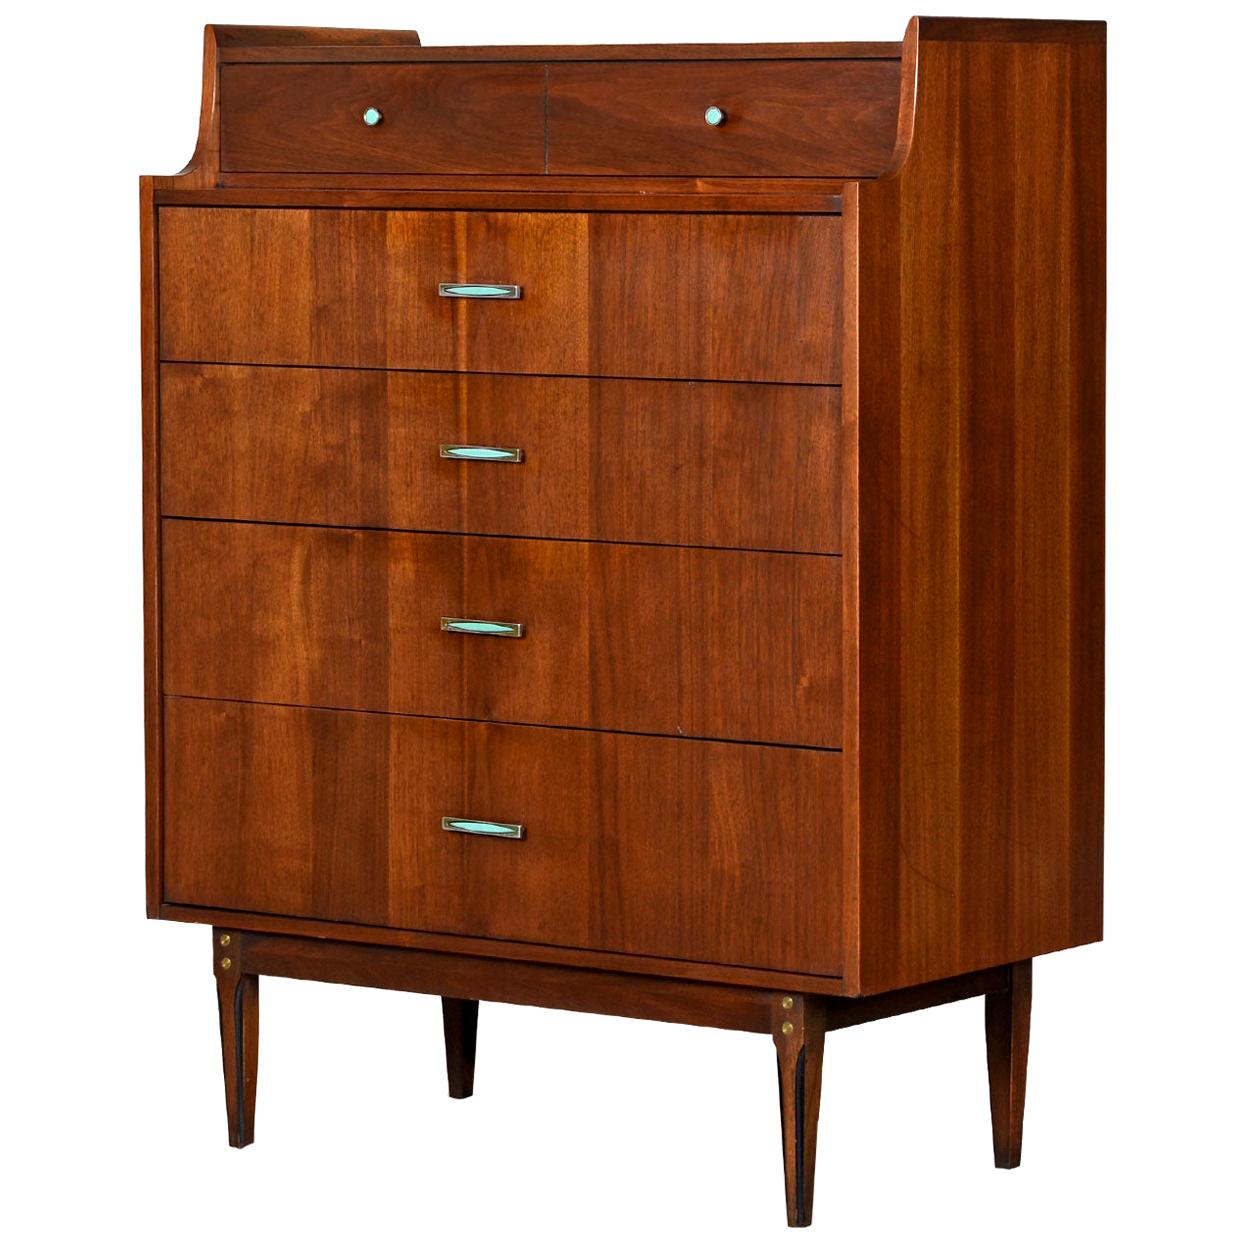 Kroehler has pulled out all the stops with this stunning high boy. A profile view highlights the unique stepped upper tier with an elegantly contoured rise. The top of the dresser is punctuated with “bat ear” tips in front. Look closely at the super